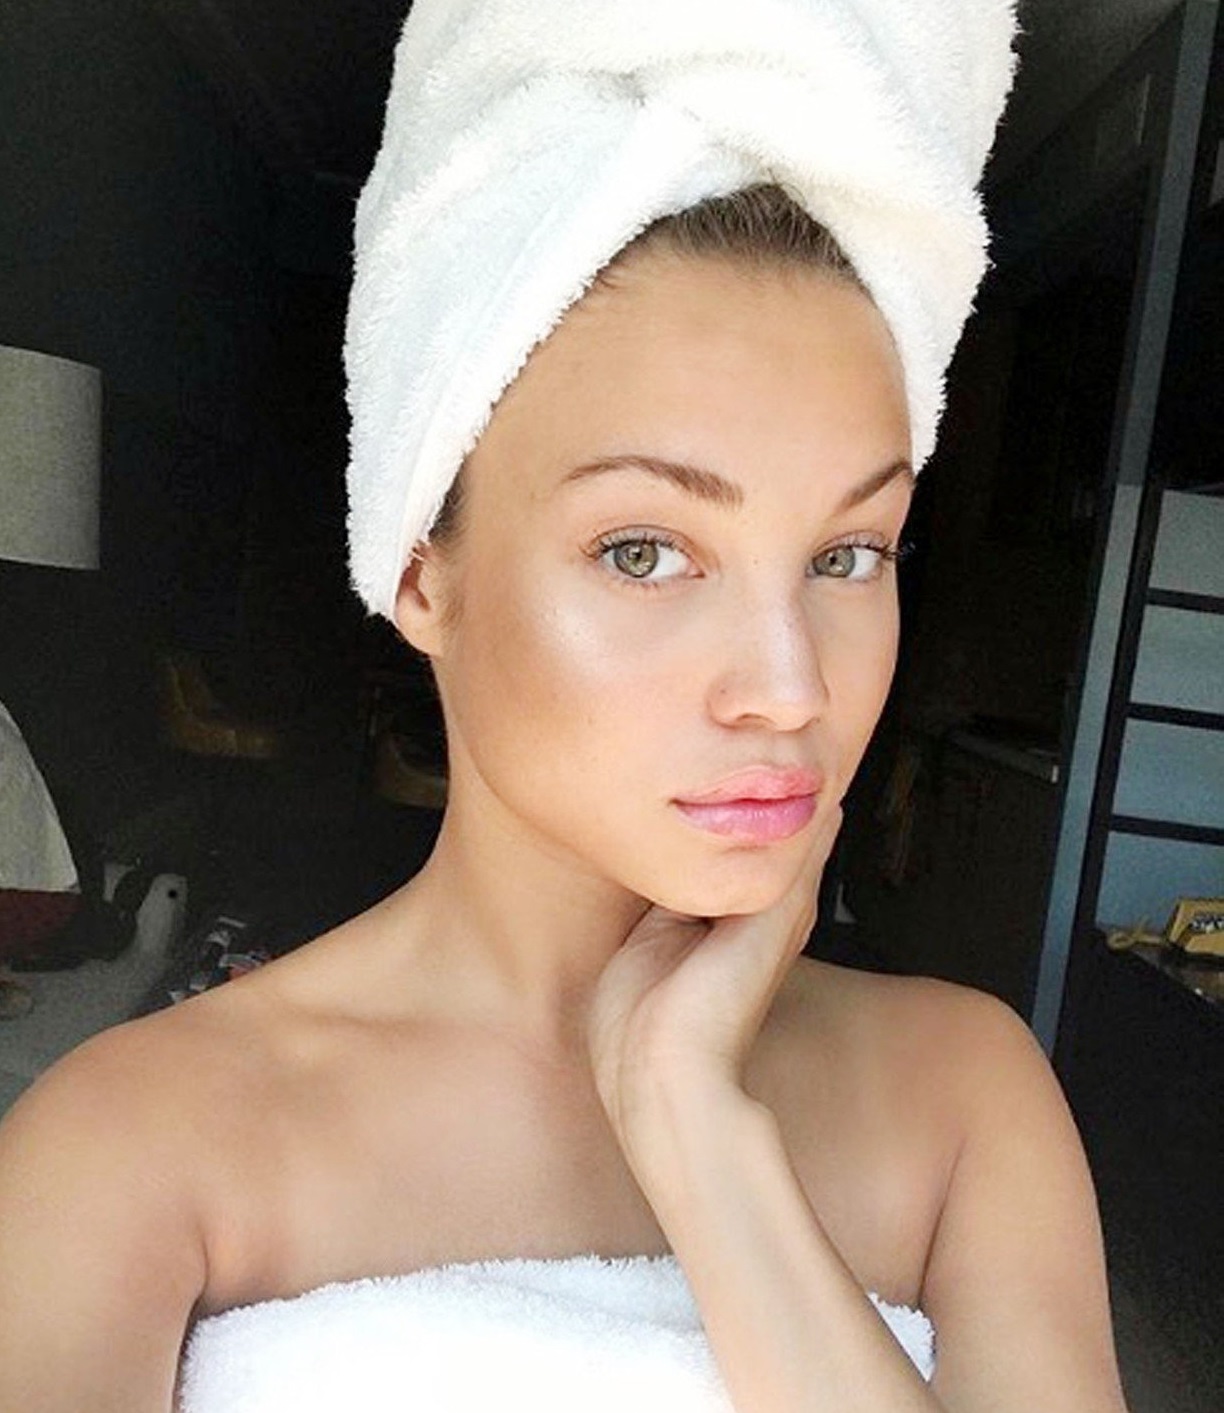 BGUK_1180175 - VARIOUS, UNITED KINGDOM - ROSE BERTRAM PICTURED IN THIS CELEBRITY SOCIAL MEDIA PHOTO. *BACKGRID DOES NOT CLAIM ANY COPYRIGHT OR LICENSE IN THE ATTACHED MATERIAL. ANY DOWNLOADING FEES CHARGED BY BACKGRID ARE FOR BACKGRID'S SERVICES ONLY, AND DO NOT, NOR ARE THEY INTENDED TO, CONVEY TO THE USER ANY COPYRIGHT OR LICENSE IN THE MATERIAL. BY PUBLISHING THIS MATERIAL , THE USER EXPRESSLY AGREES TO INDEMNIFY AND TO HOLD BACKGRID HARMLESS FROM ANY CLAIMS, DEMANDS, OR CAUSES OF ACTION ARISING OUT OF OR CONNECTED IN ANY WAY WITH USER'S PUBLICATION OF THE MATERIAL* Pictured: ROSE BERTRAM BACKGRID UK 20 MARCH 2018, Image: 366489075, License: Rights-managed, Restrictions: , Model Release: no, Credit line: Profimedia, Xposurephotos